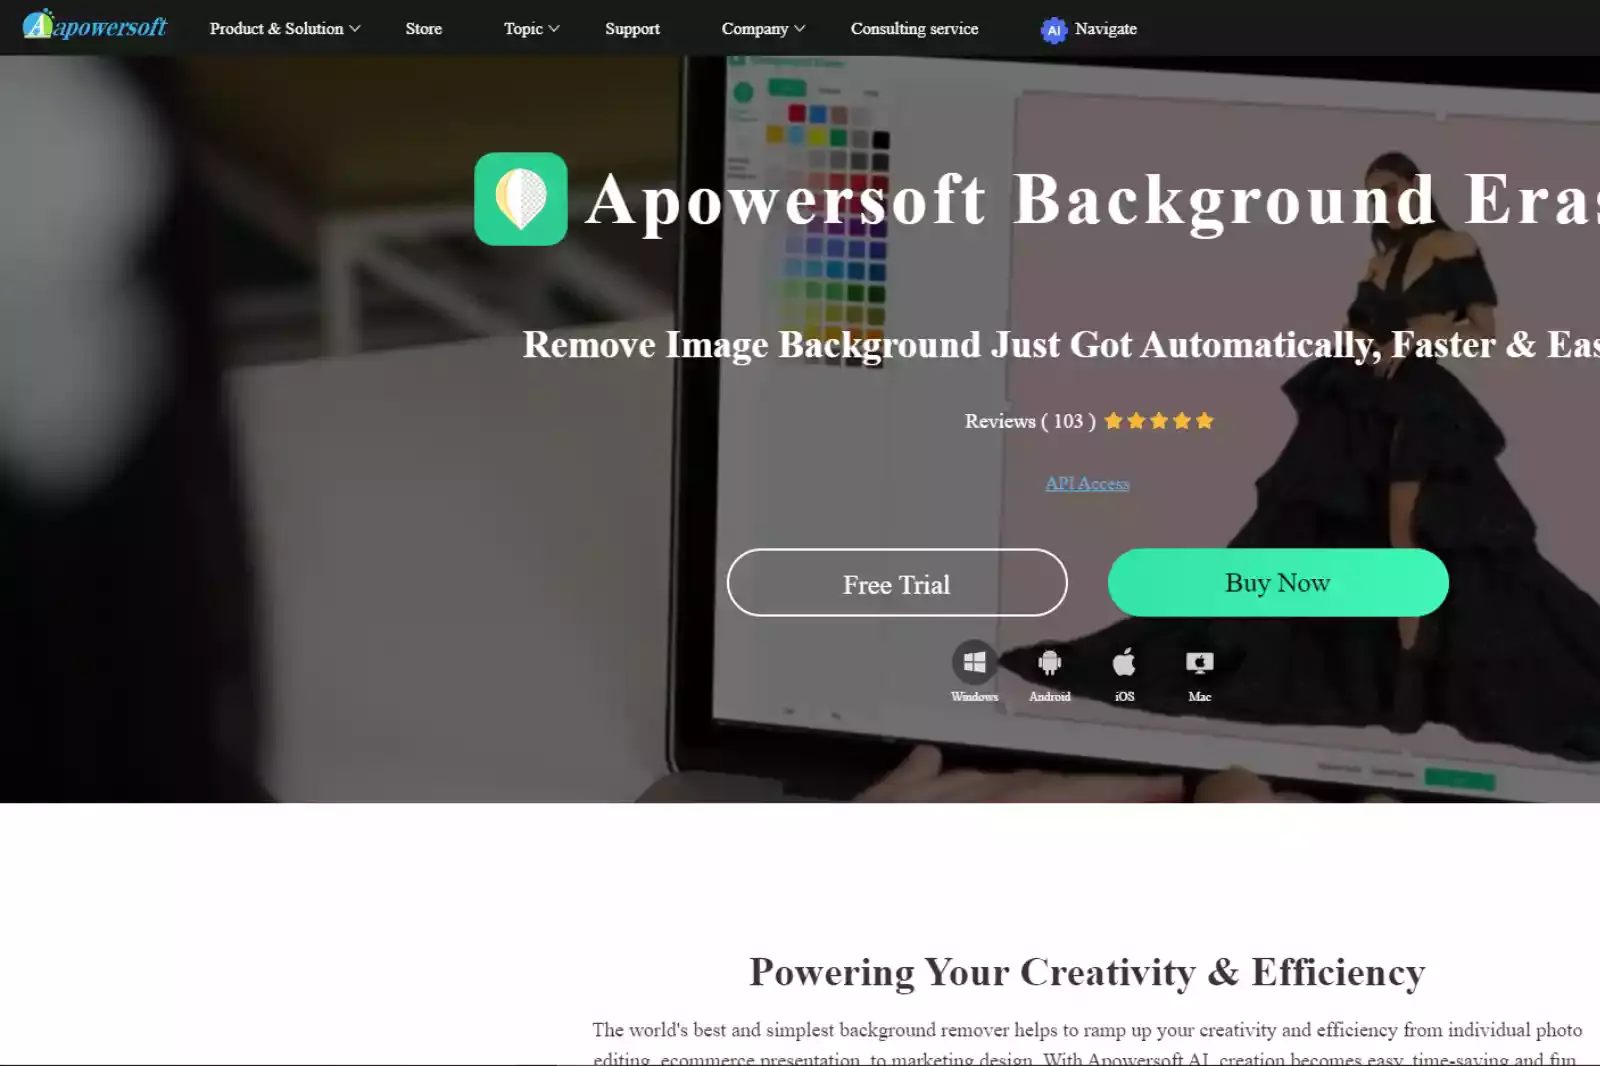 Home Page of Apowersoft Background Eraser